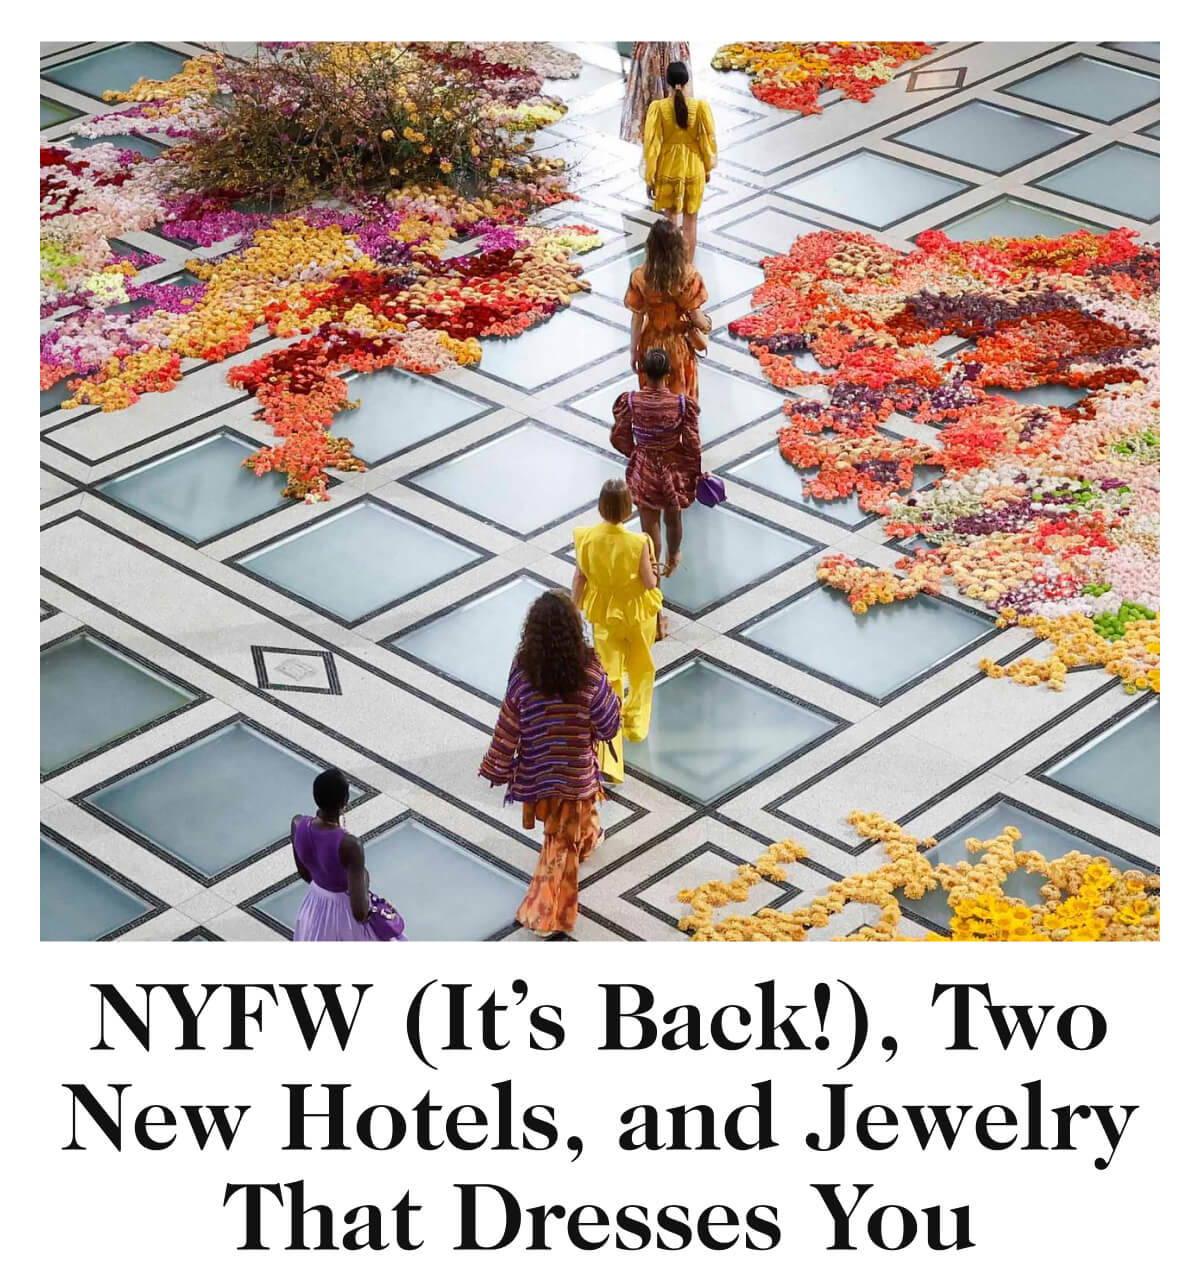 NYFW (It’s Back!), Two New Hotels, and Jewelry That Dresses You